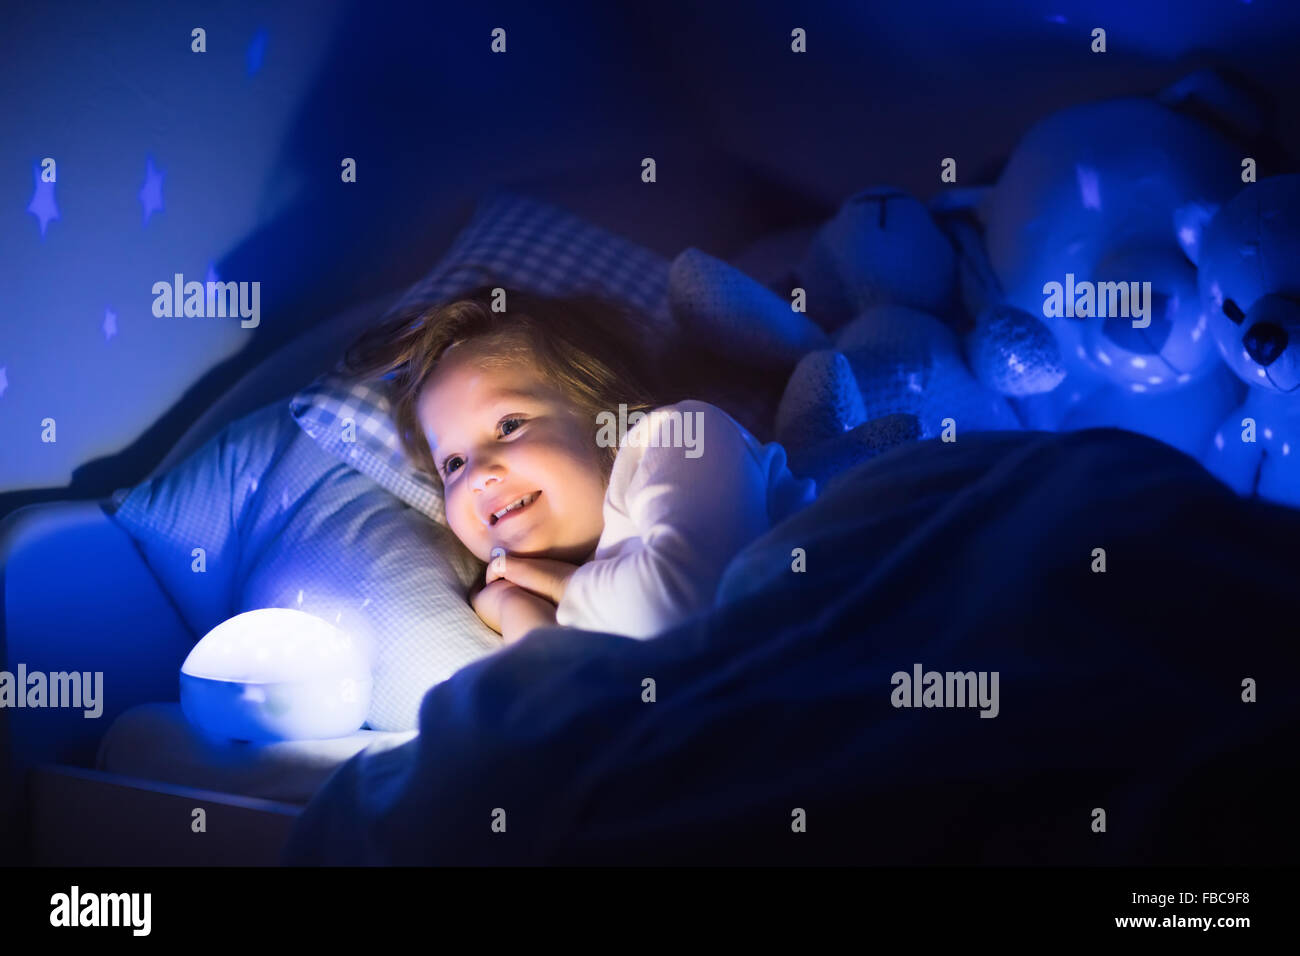 Little girl reading a book in bed. Dark bedroom with night light projecting stars on room ceiling. Kids nursery and bedding. Stock Photo